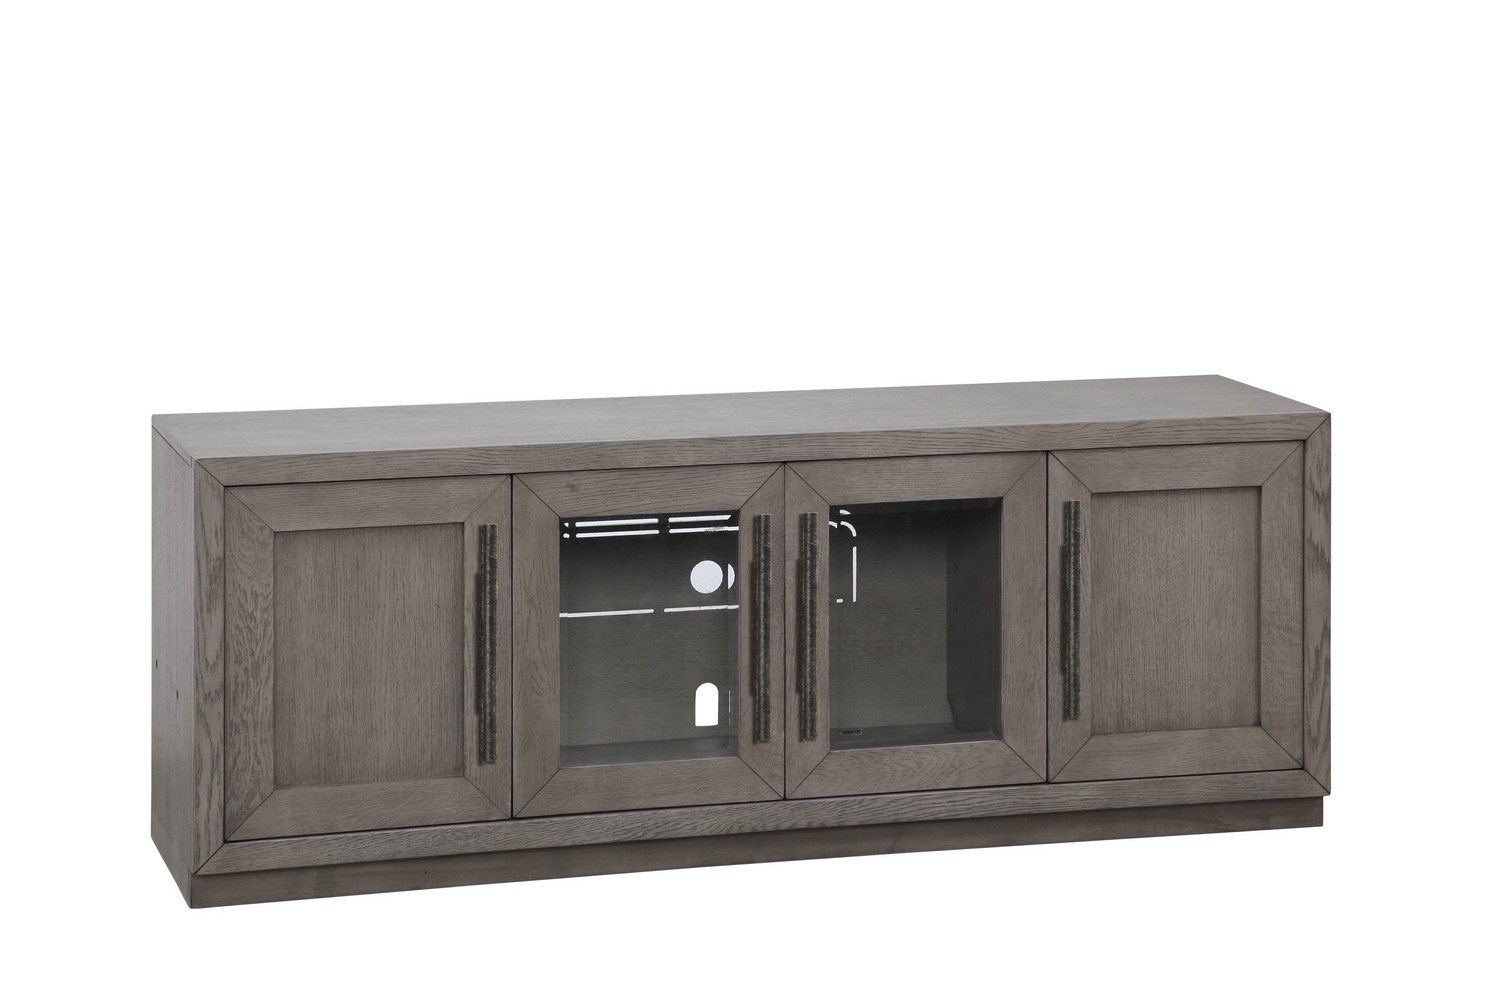 Parker House Pure Modern 63 Inch Door TV Console - Moonstone